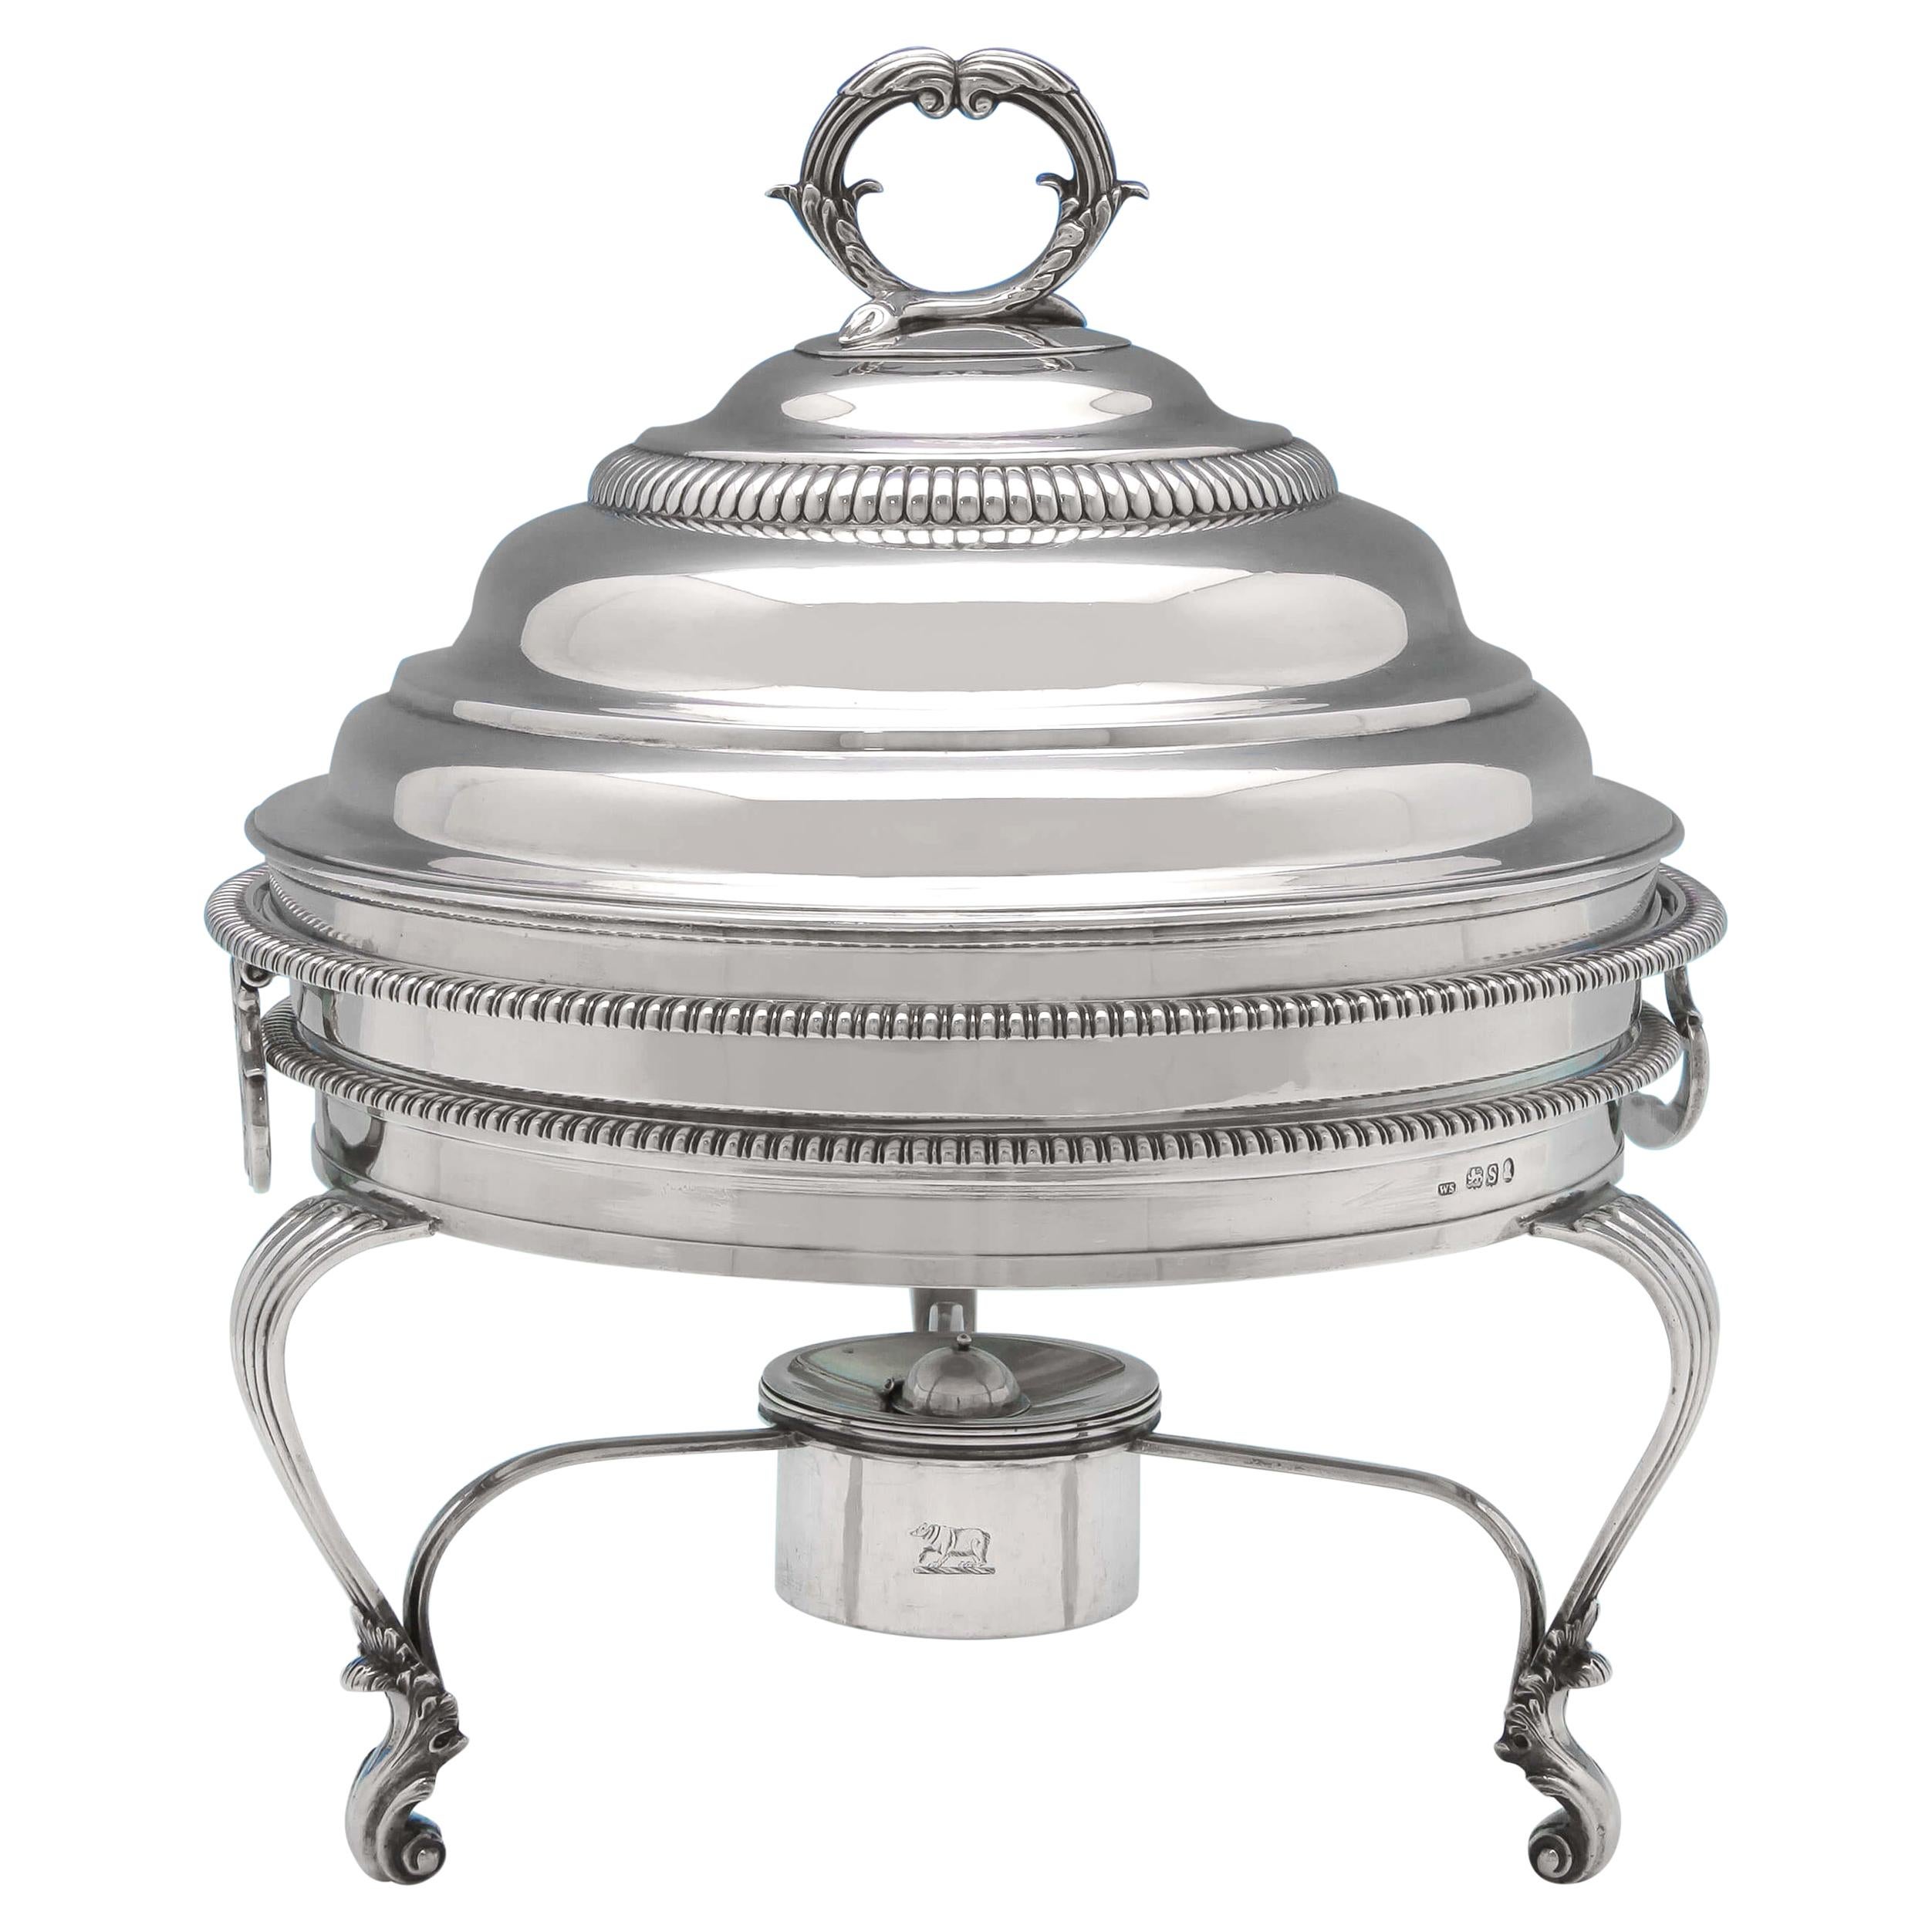 19th Century Regency Antique Sterling Silver Chafing Dish by William Stroud